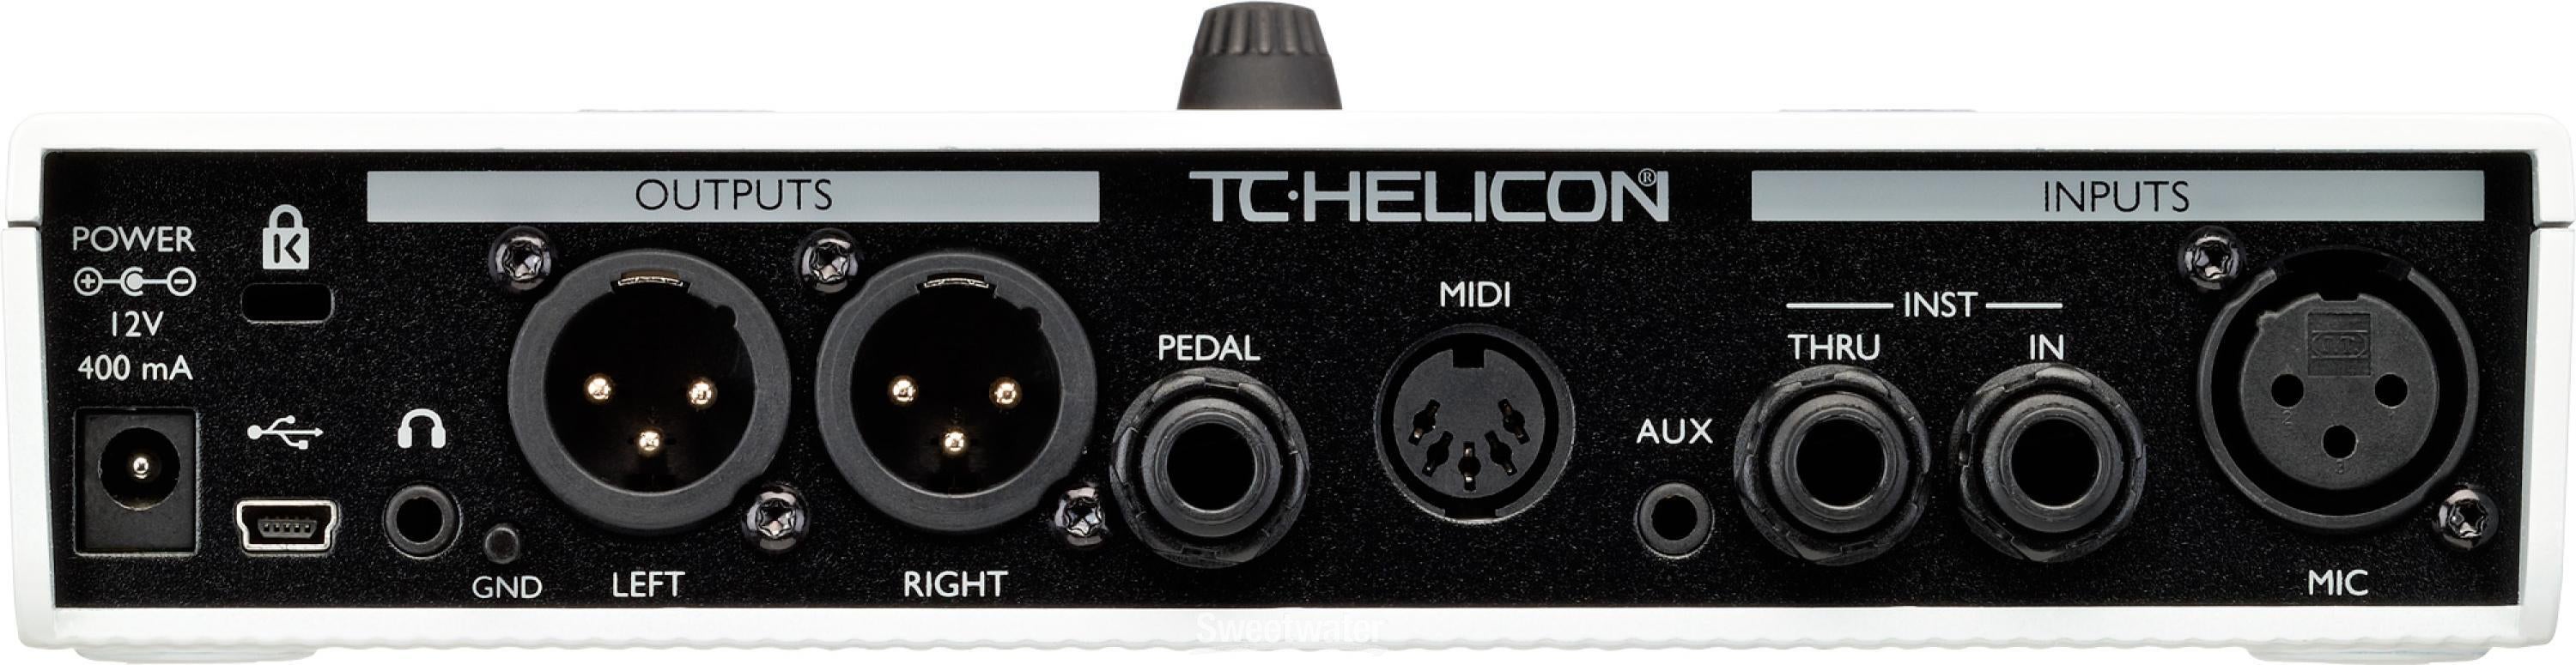 TC-Helicon VoiceLive Play GTX Reviews | Sweetwater